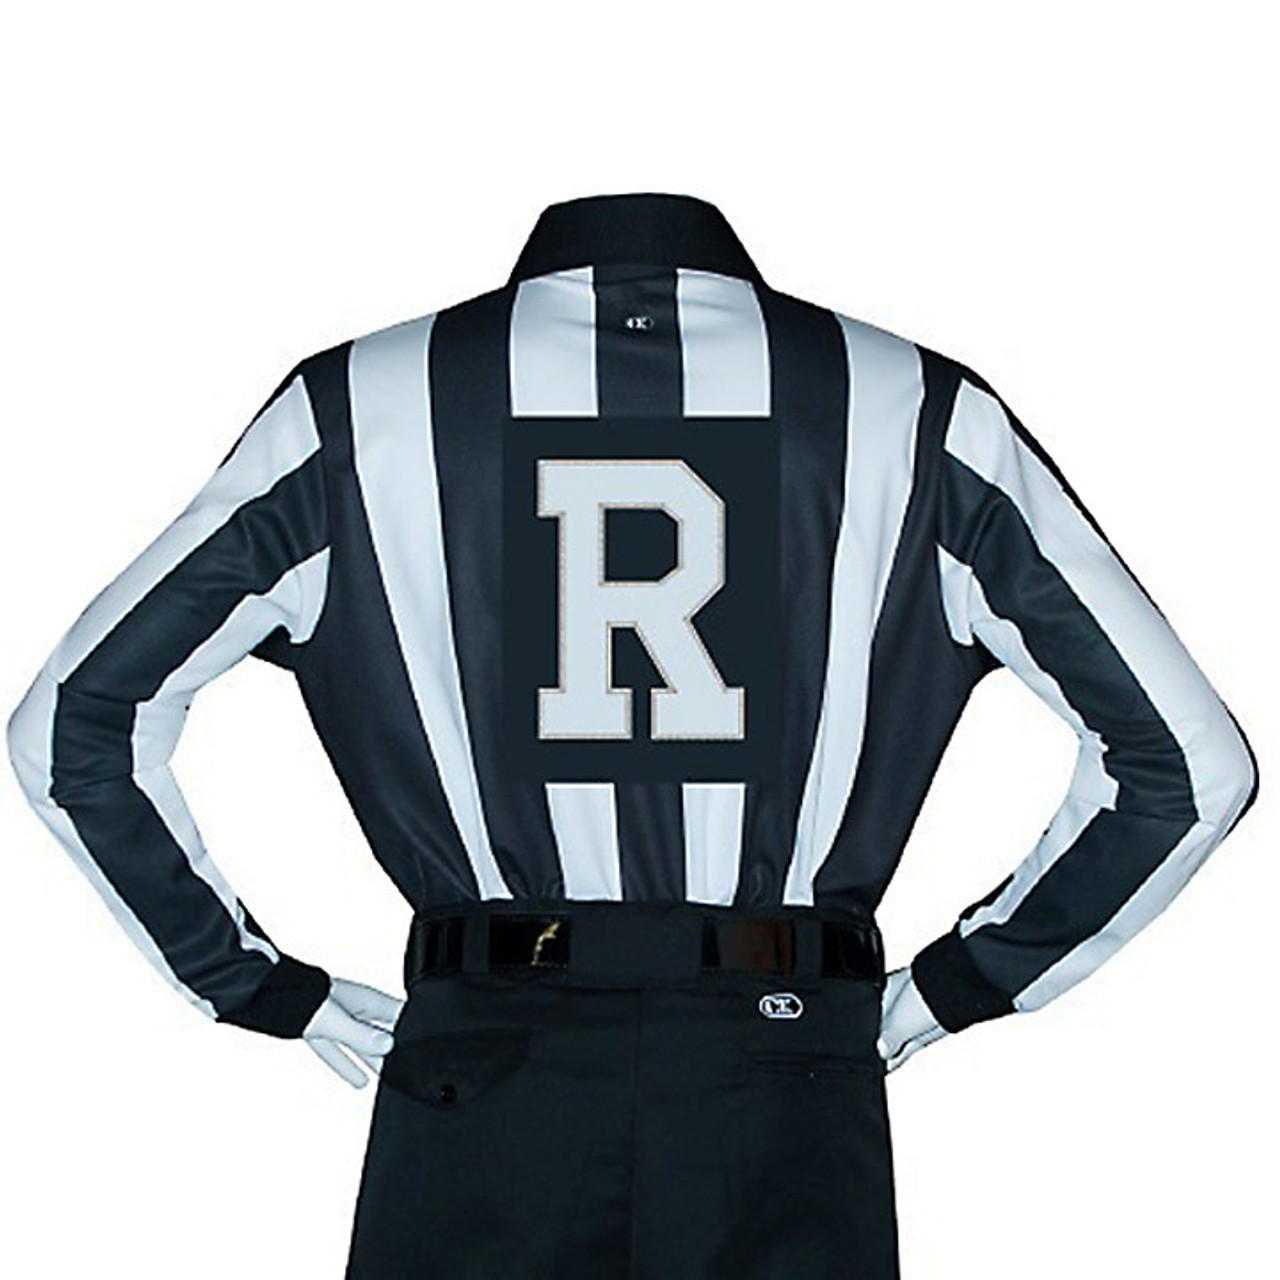 Cliff Keen MXS Sublimated Long Sleeve Football Ref Shirt